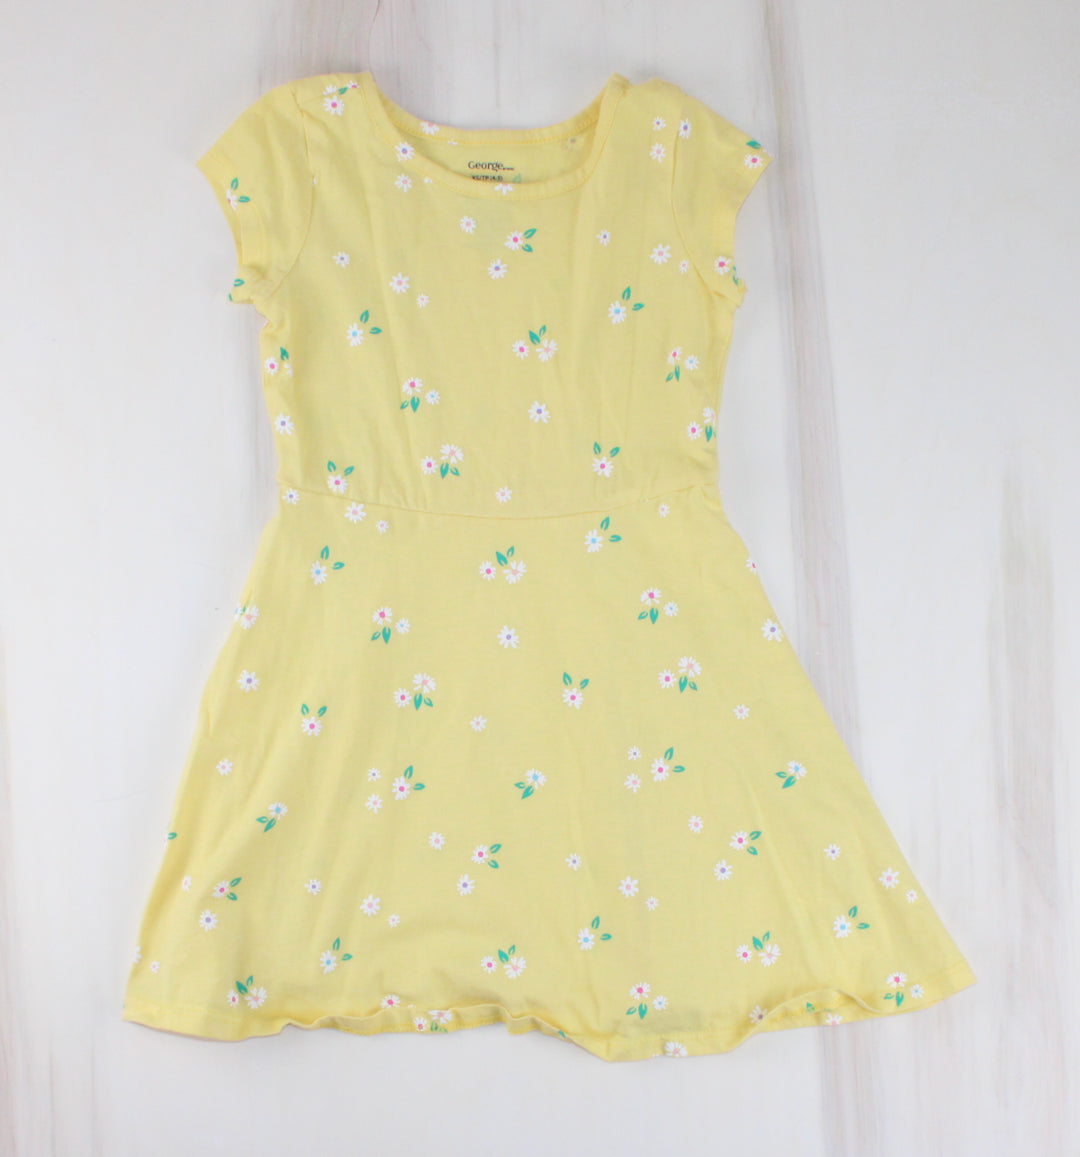 GEORGE YELLOW DRESS WITH DAISIES 4-5Y EUC